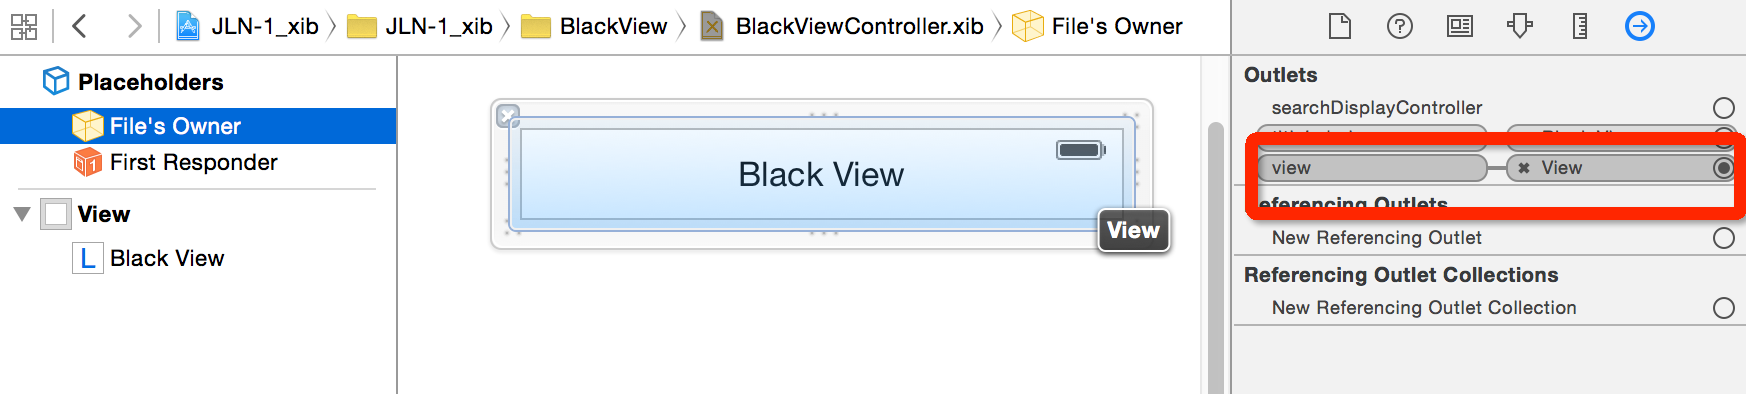 blackview_xib_connections.png